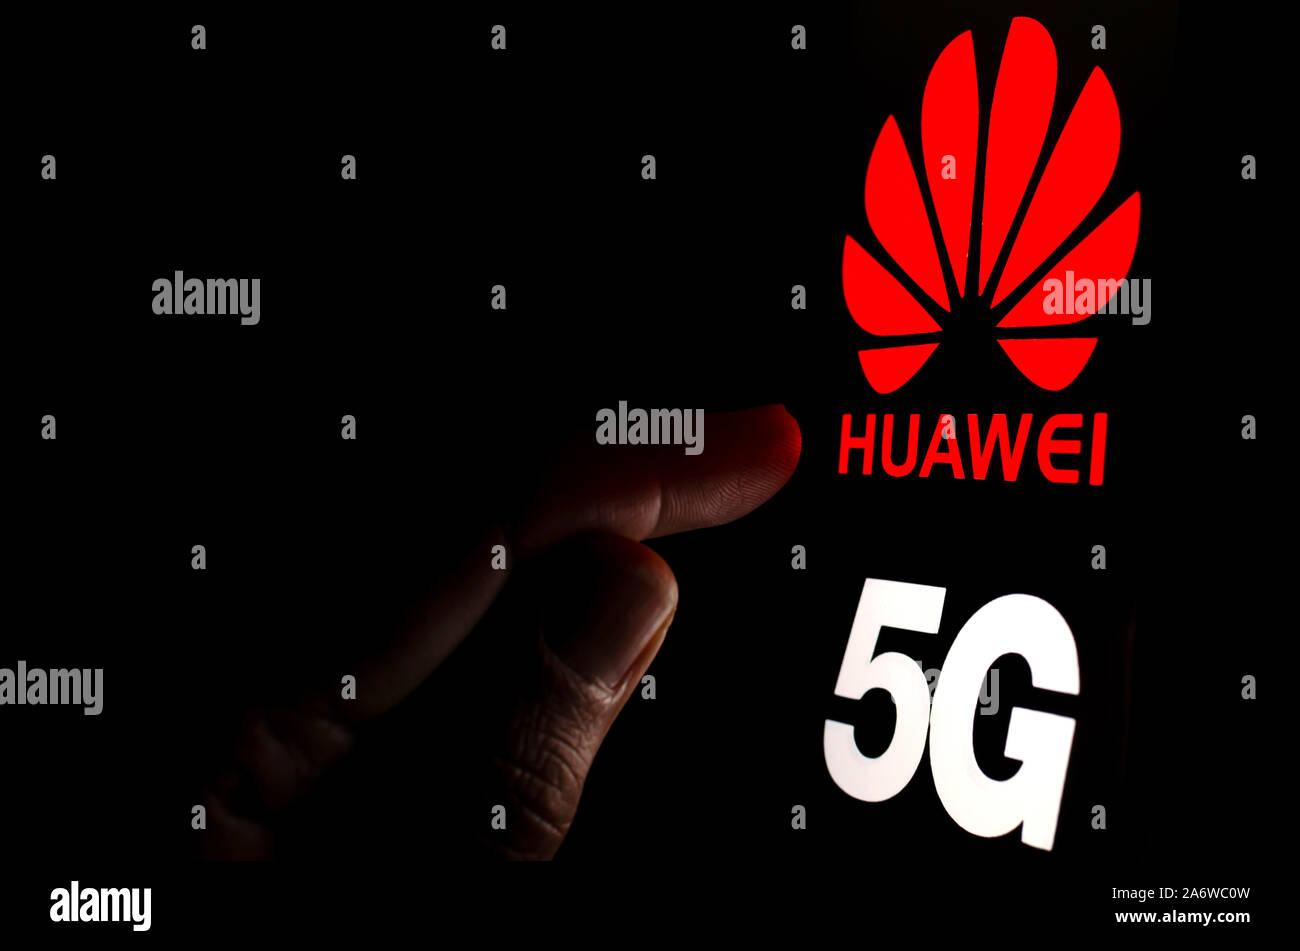 Huawei 5G logo on a smartphone screen in a dark room and a finger touching it. Stock Photo